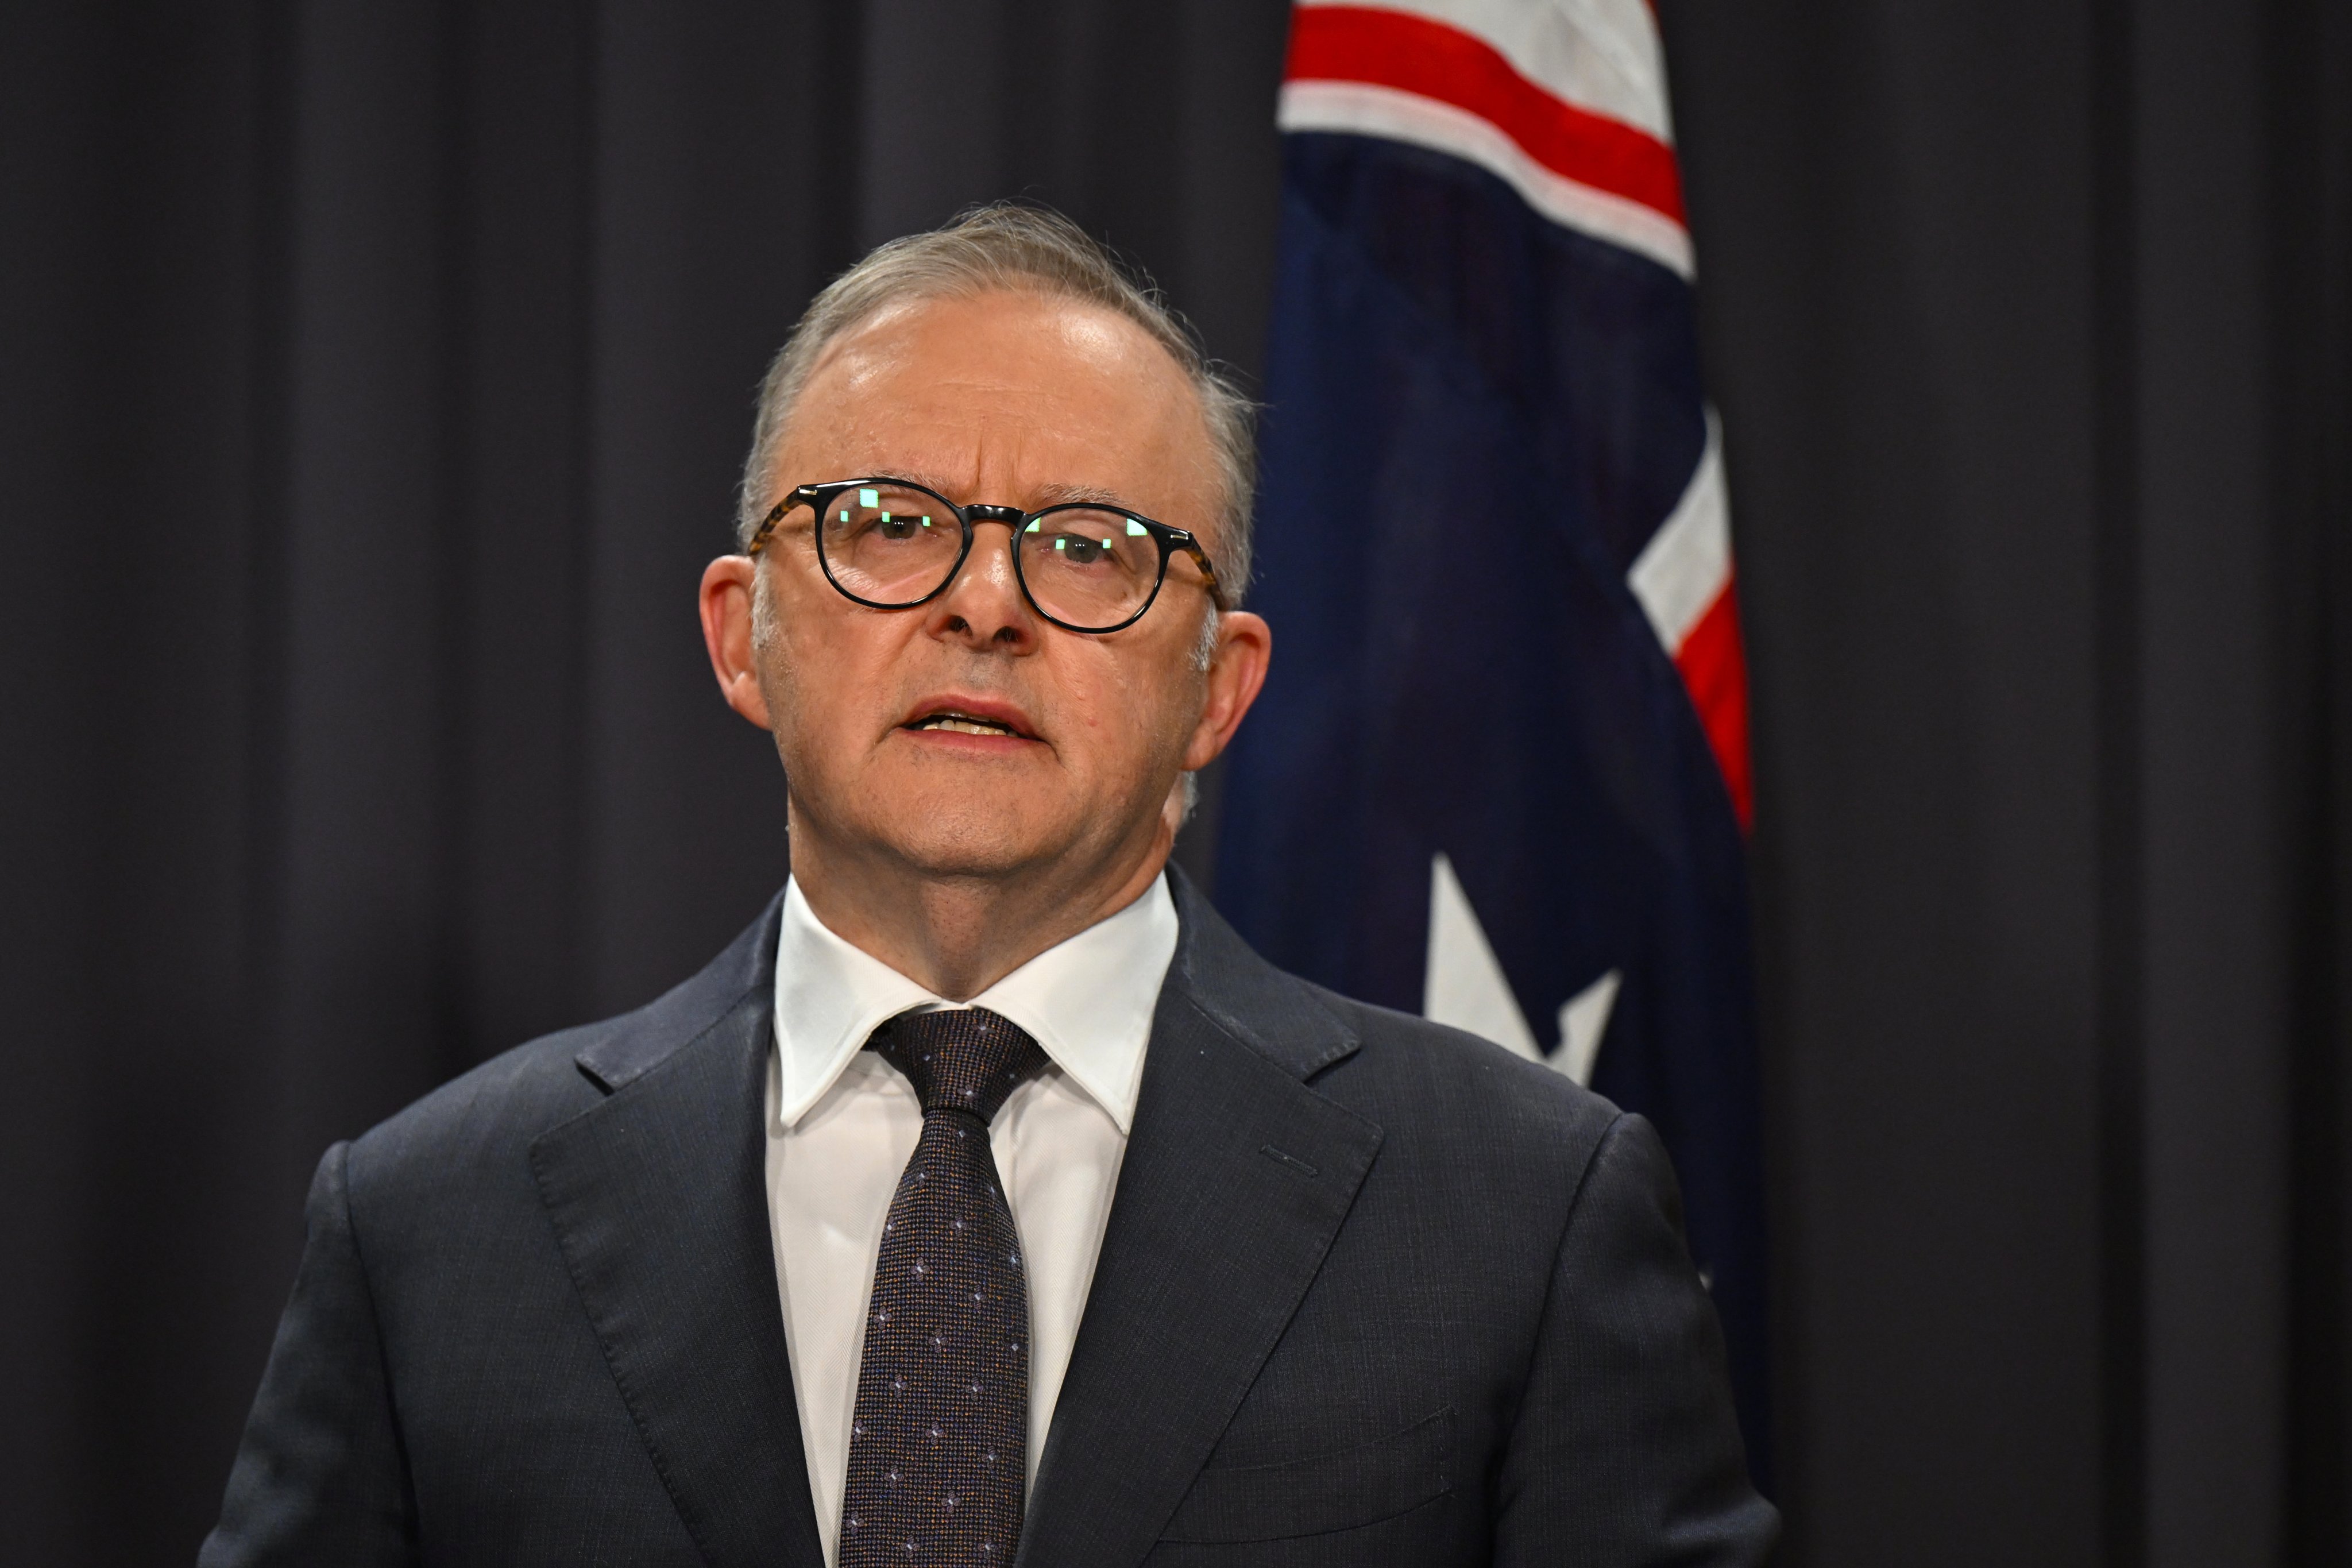 Australian Prime Minister Anthony Albanese has rejected China’s claim Australia was at fault during a dangerous aircraft encounter this past weekend. Photo: EPA-EFE